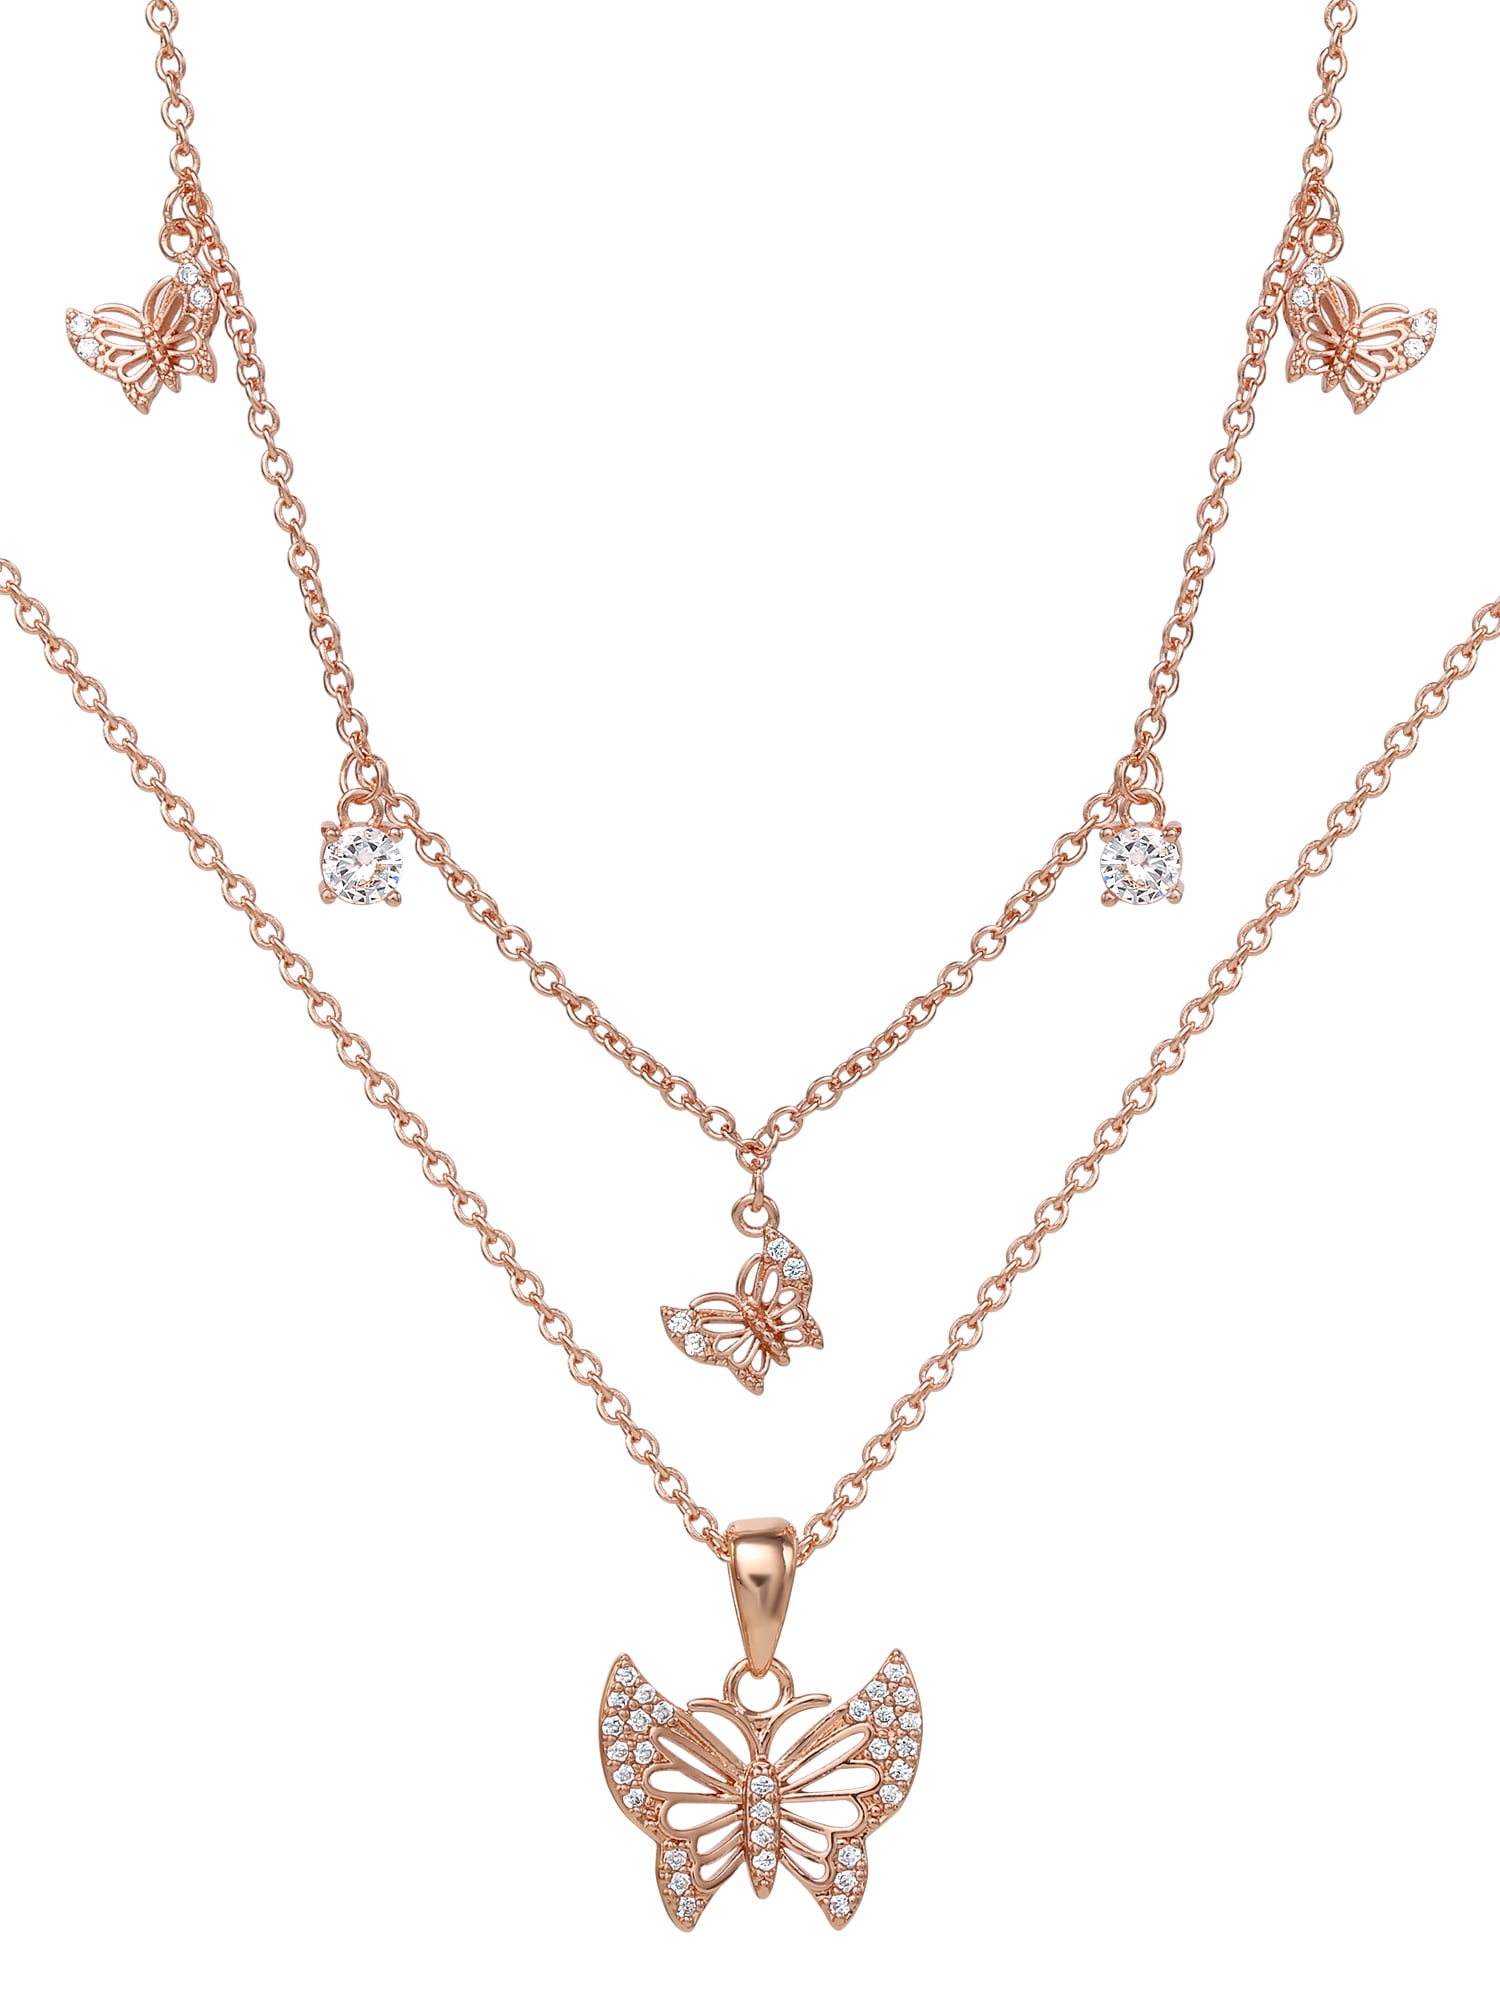 Believe by Brilliance Brass Pink Gold Plated Cubic Zirconia Layered Butterfly  Necklace Set - Walmart.com